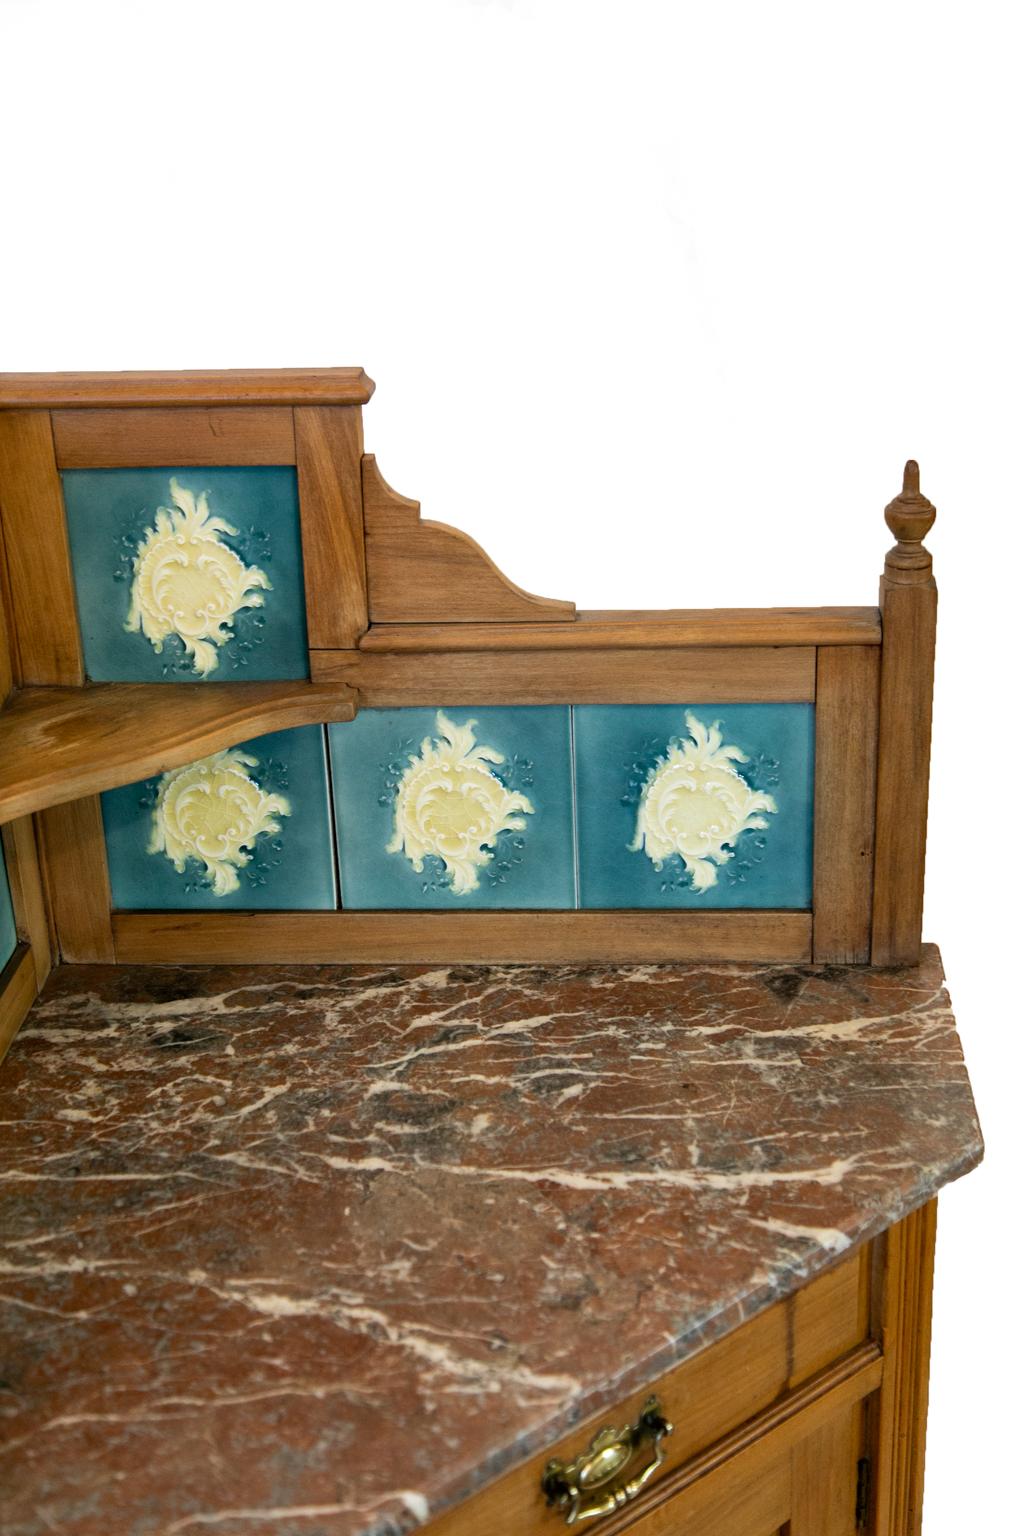 Pair of English marble-top corner cabinets, each retaining the original majolica tiles in the backs, marble, and hardware. The drawers have raised panels and the top sections have turned finials and shallow corner shelves.
 